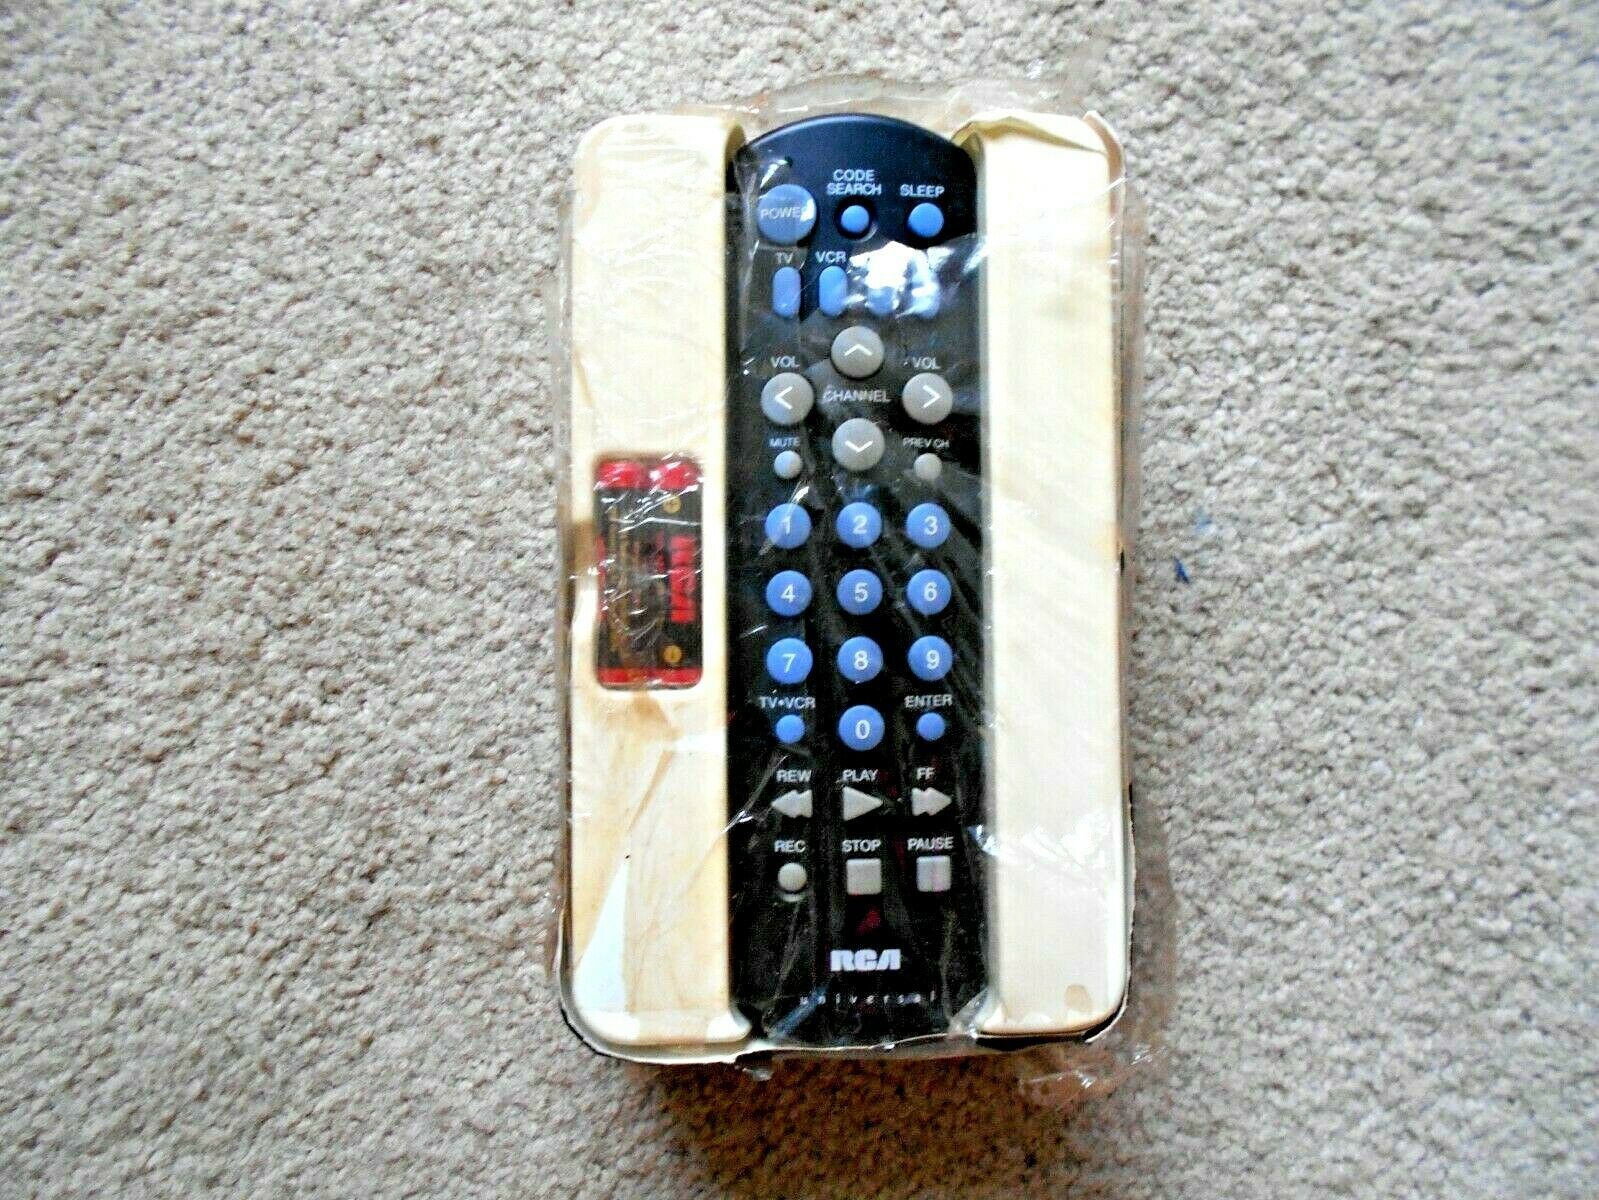 Primary image for RCA Universal Remote Control for TV, VCR, Cable Box Model RCU440KIT